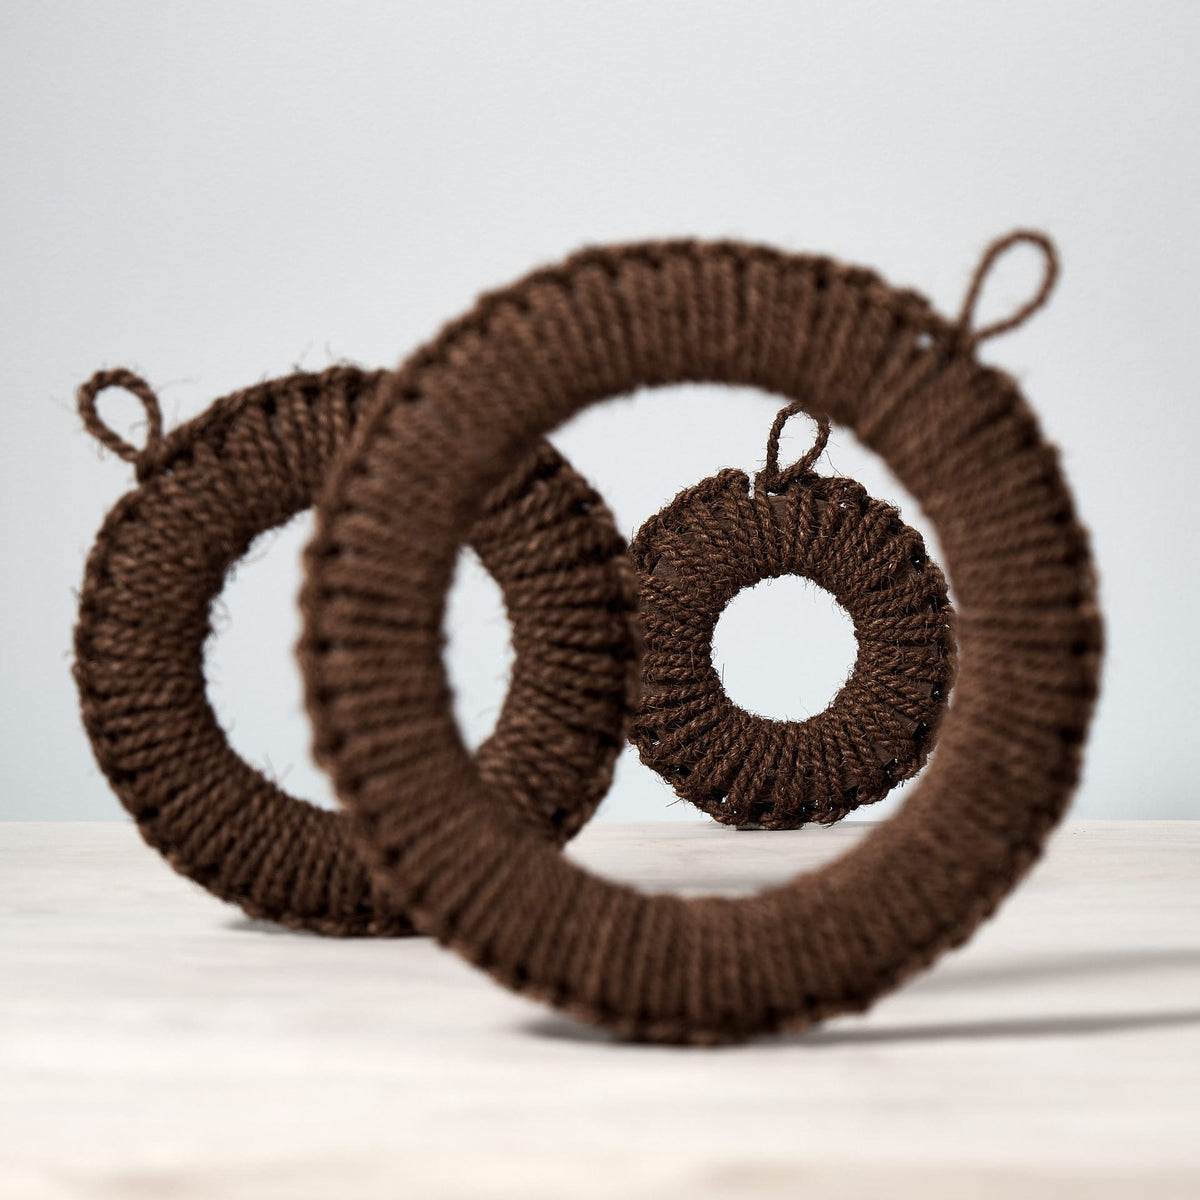 Three Hand-Knit Trivet – Small ornaments by Takada on a table.